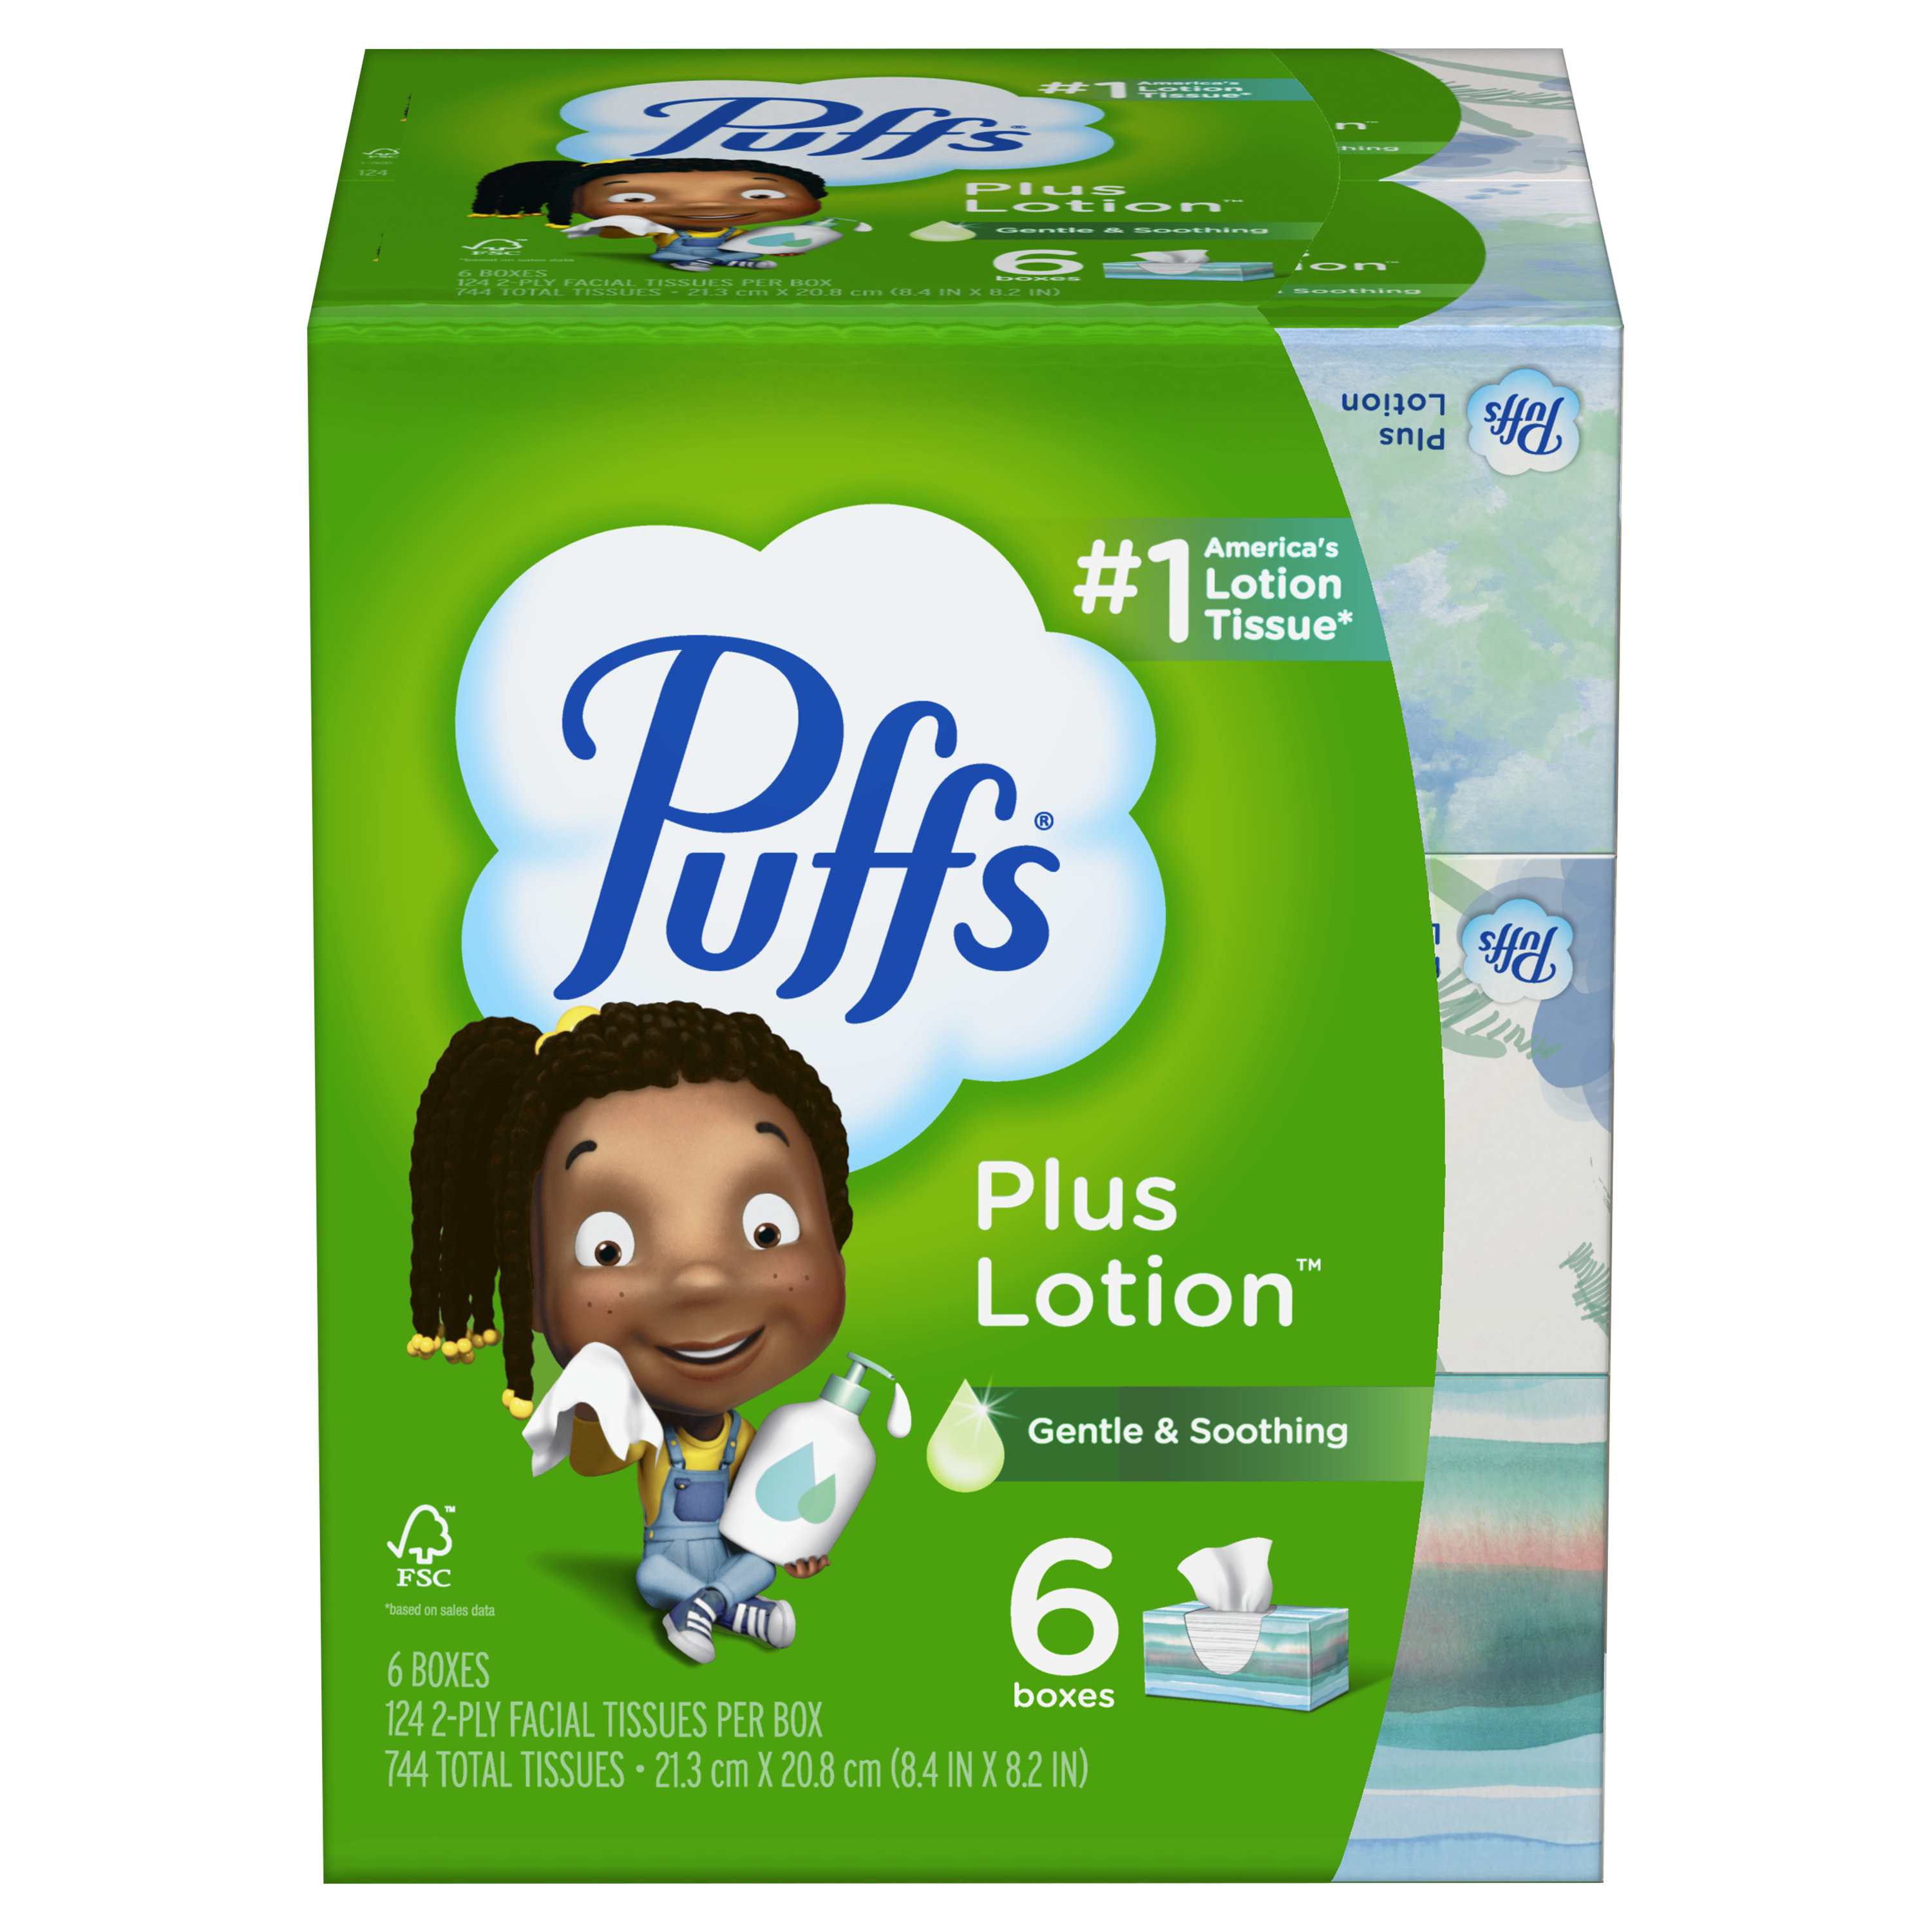 Puffs Plus Lotion Facial Tissue, 6 Family Size Boxes, 124 Tissues per Box, Green - image 2 of 13